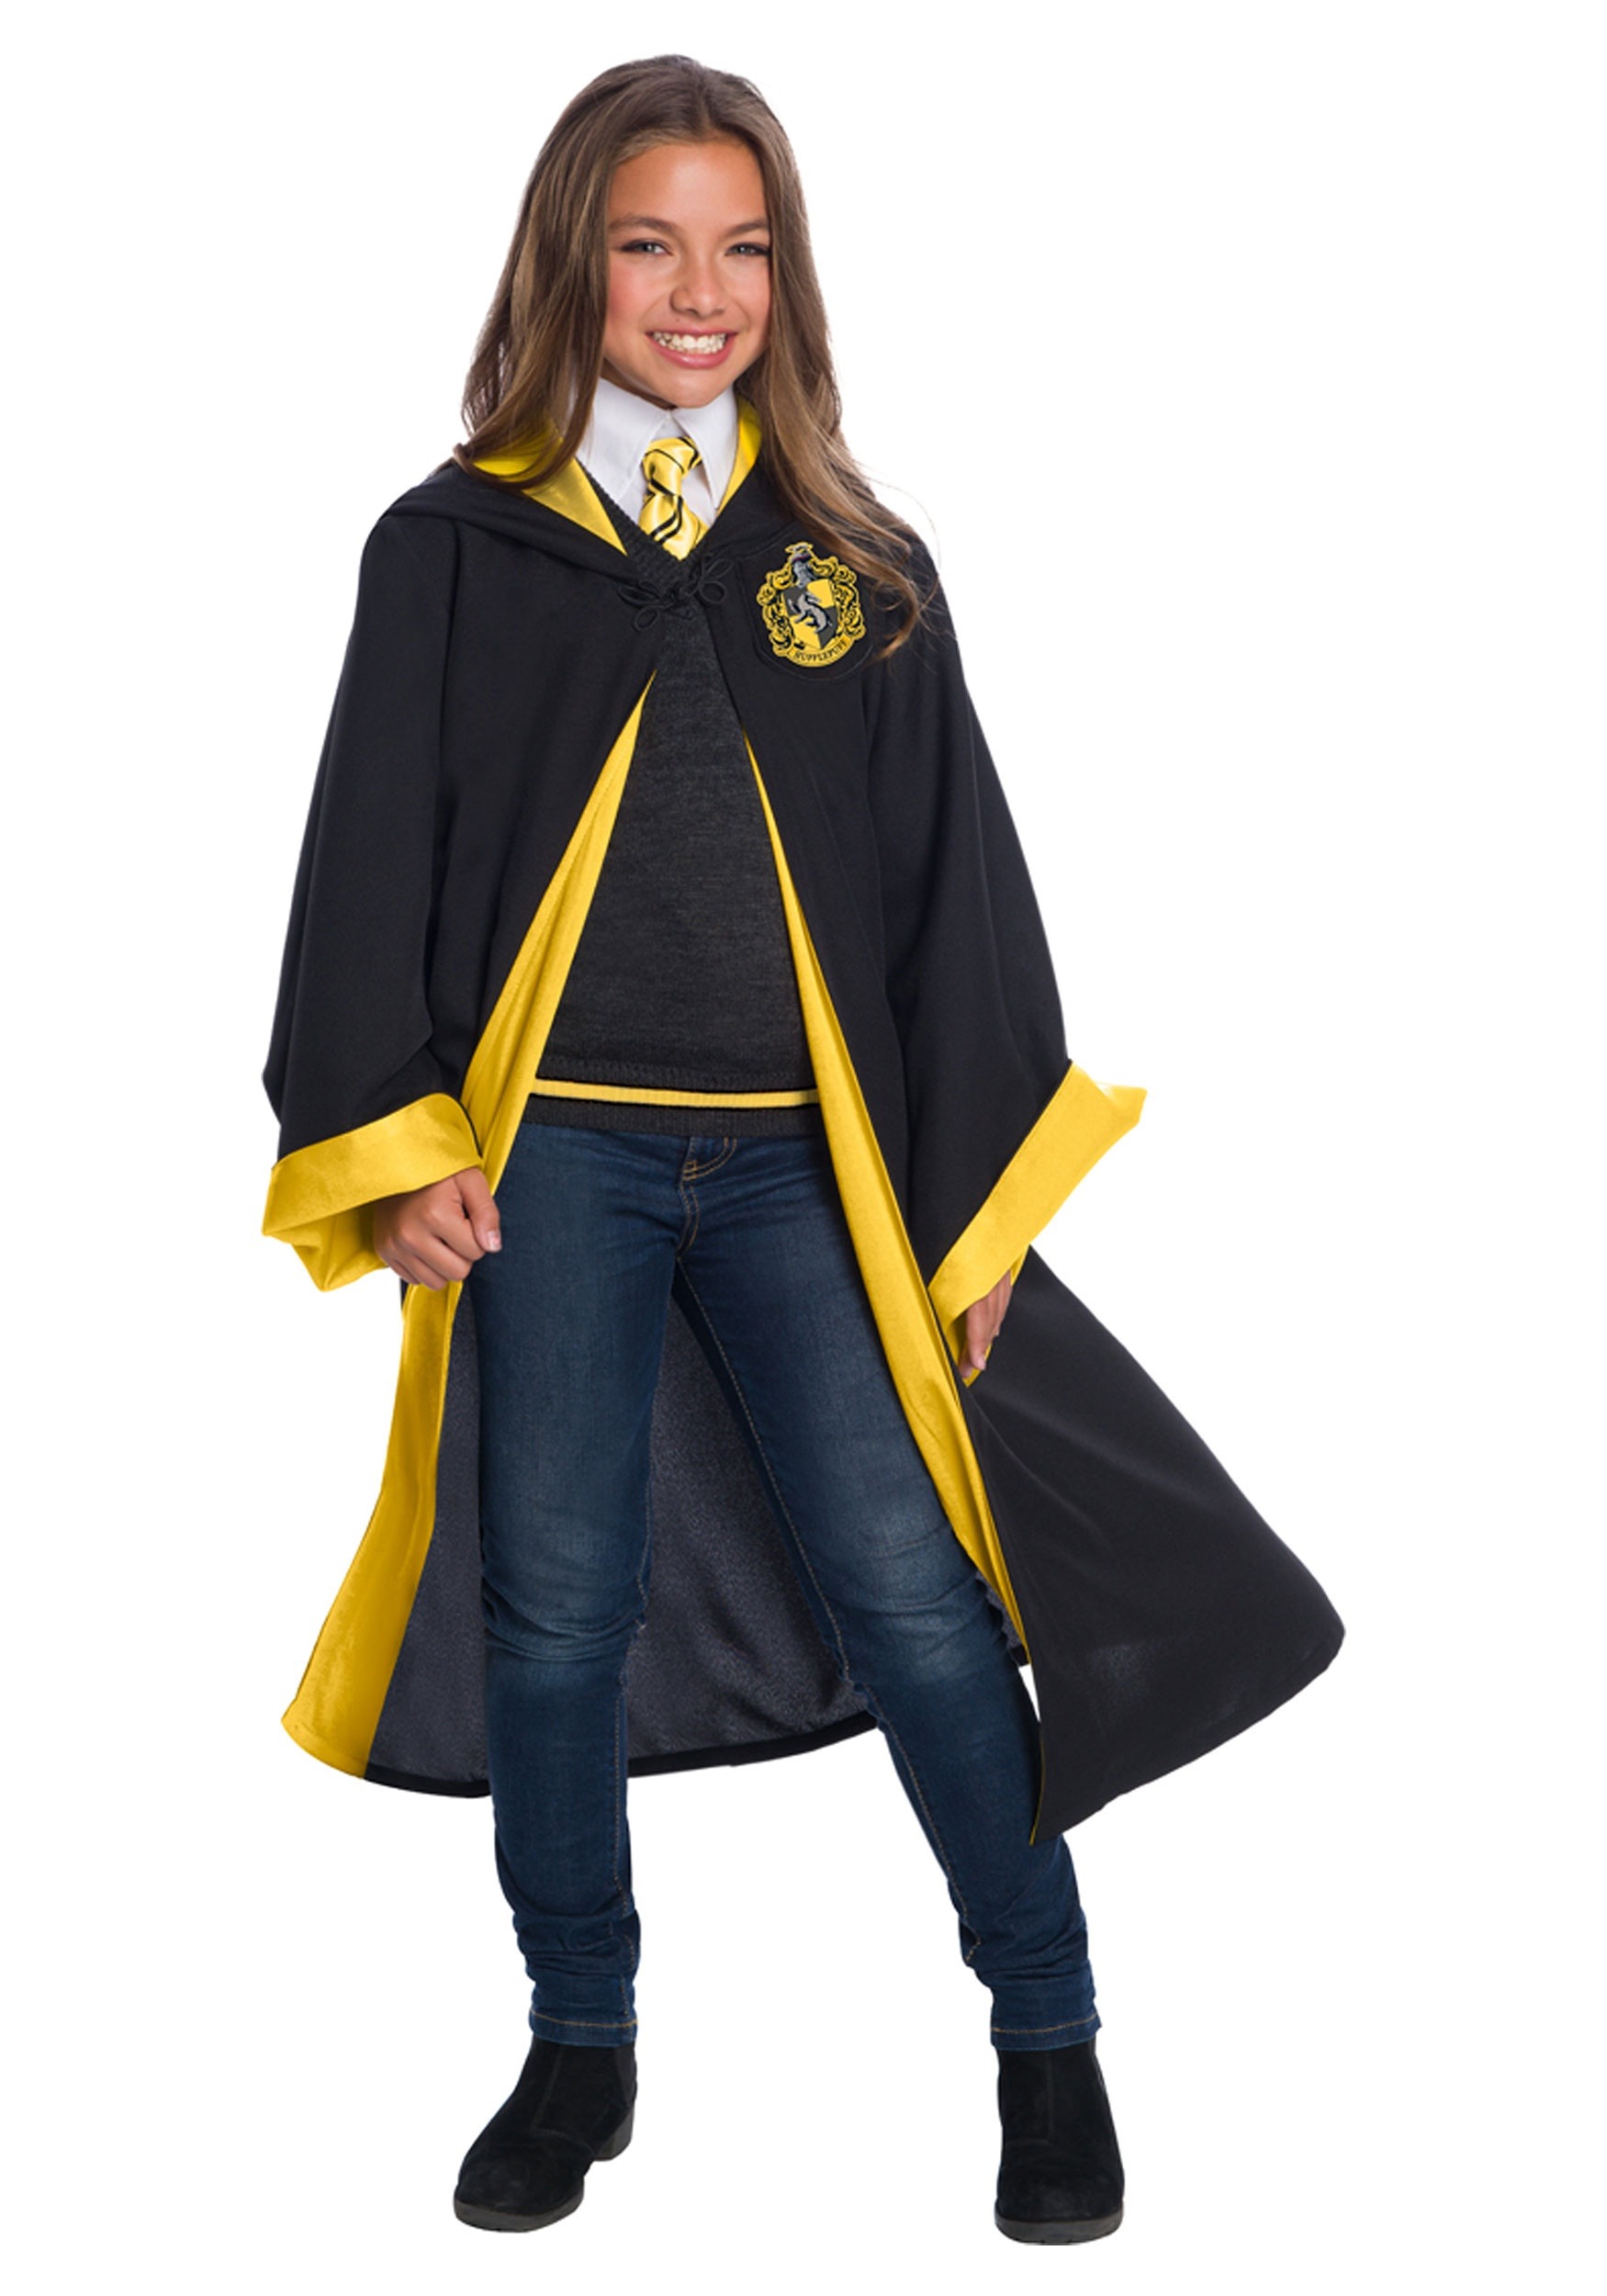 Actualizar 82+ imagen hufflepuff outfit female - Abzlocal.mx